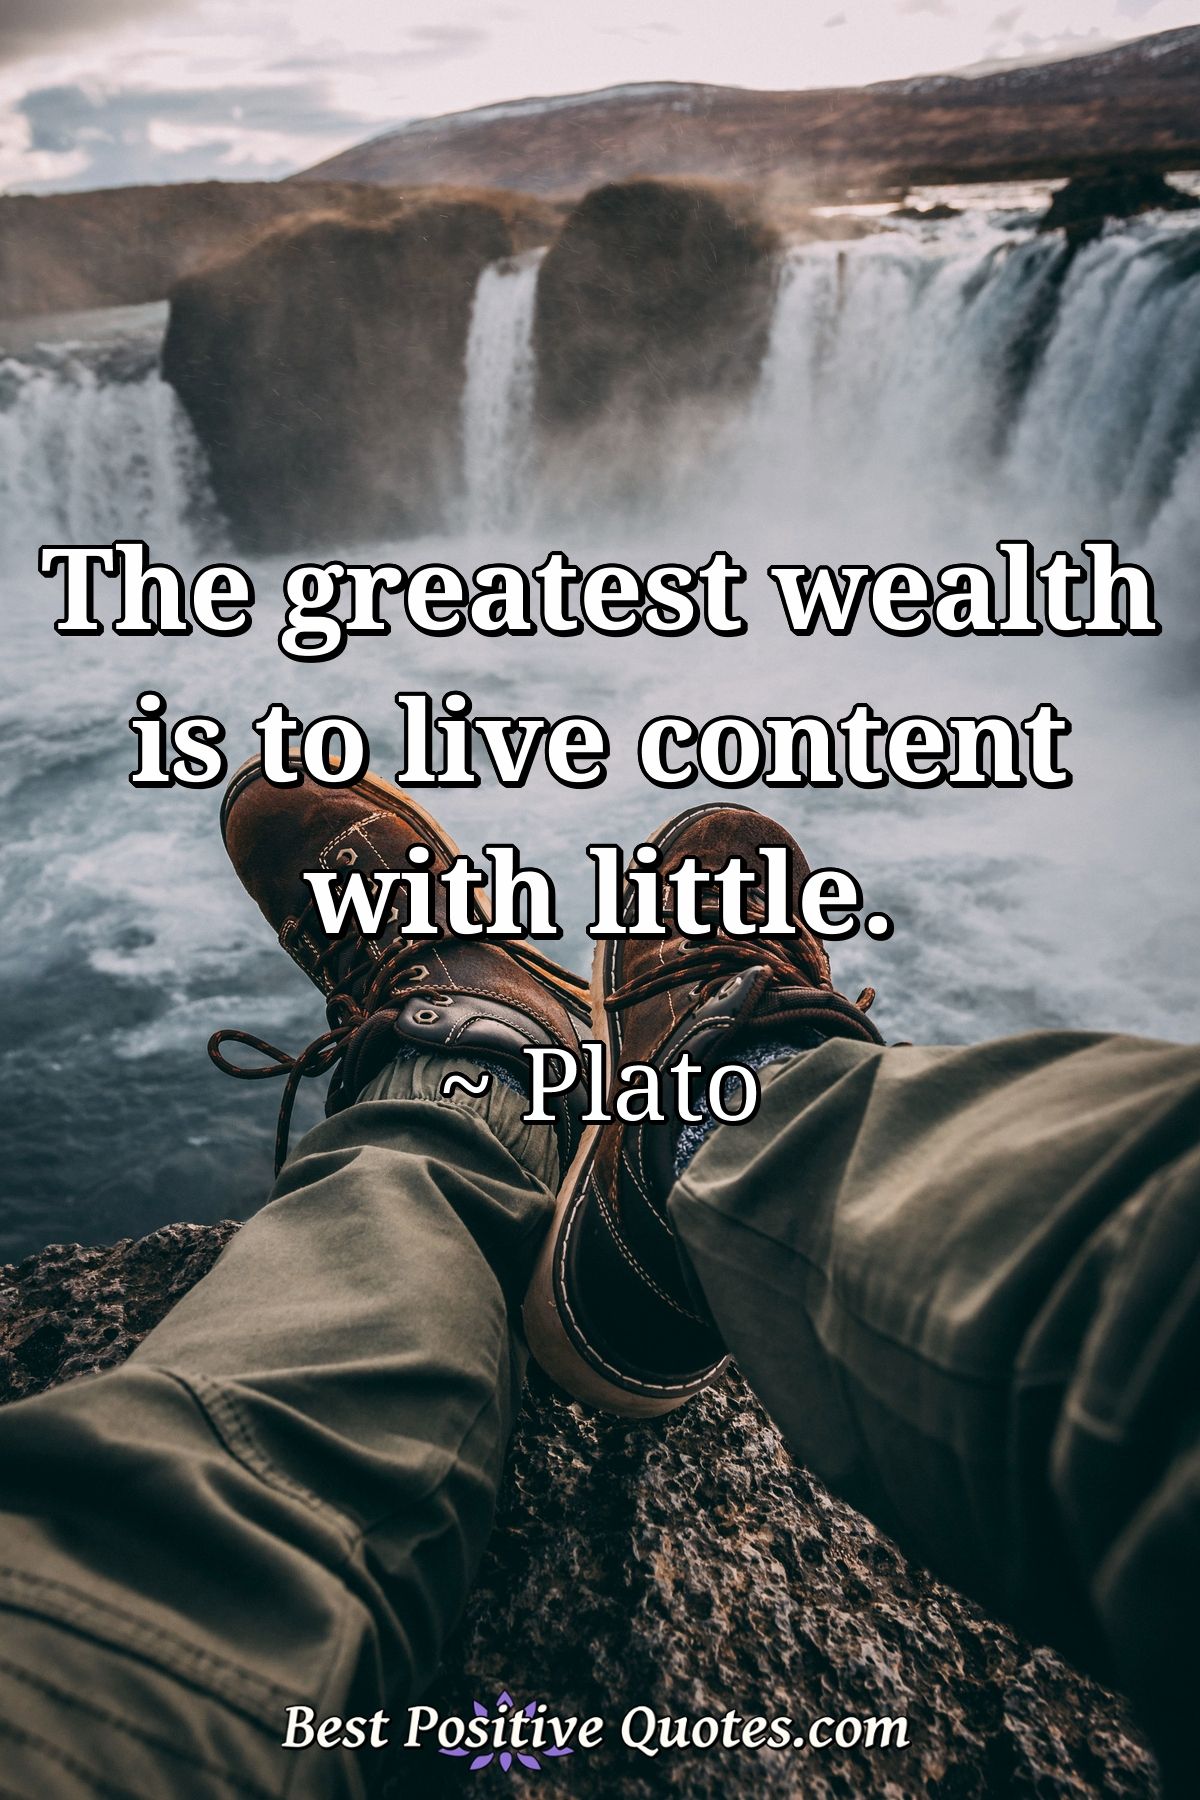 The greatest wealth is to live content with little. - Plato